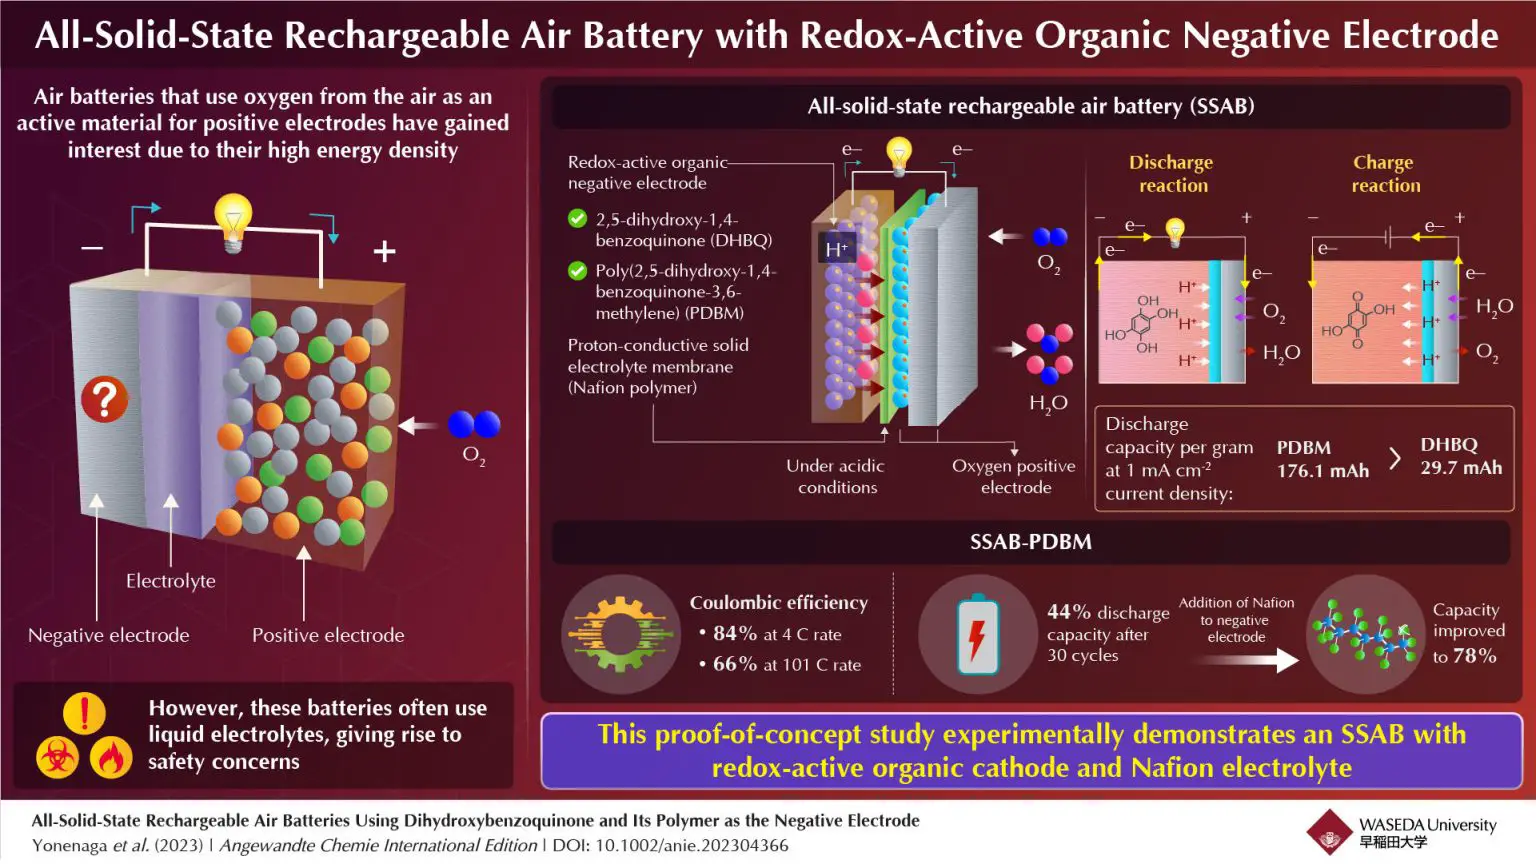 All-Solid-State-Rechargeable-Air-Battery-With-Redox-Active-Organic-Negative-Electrode-1536x864.webp